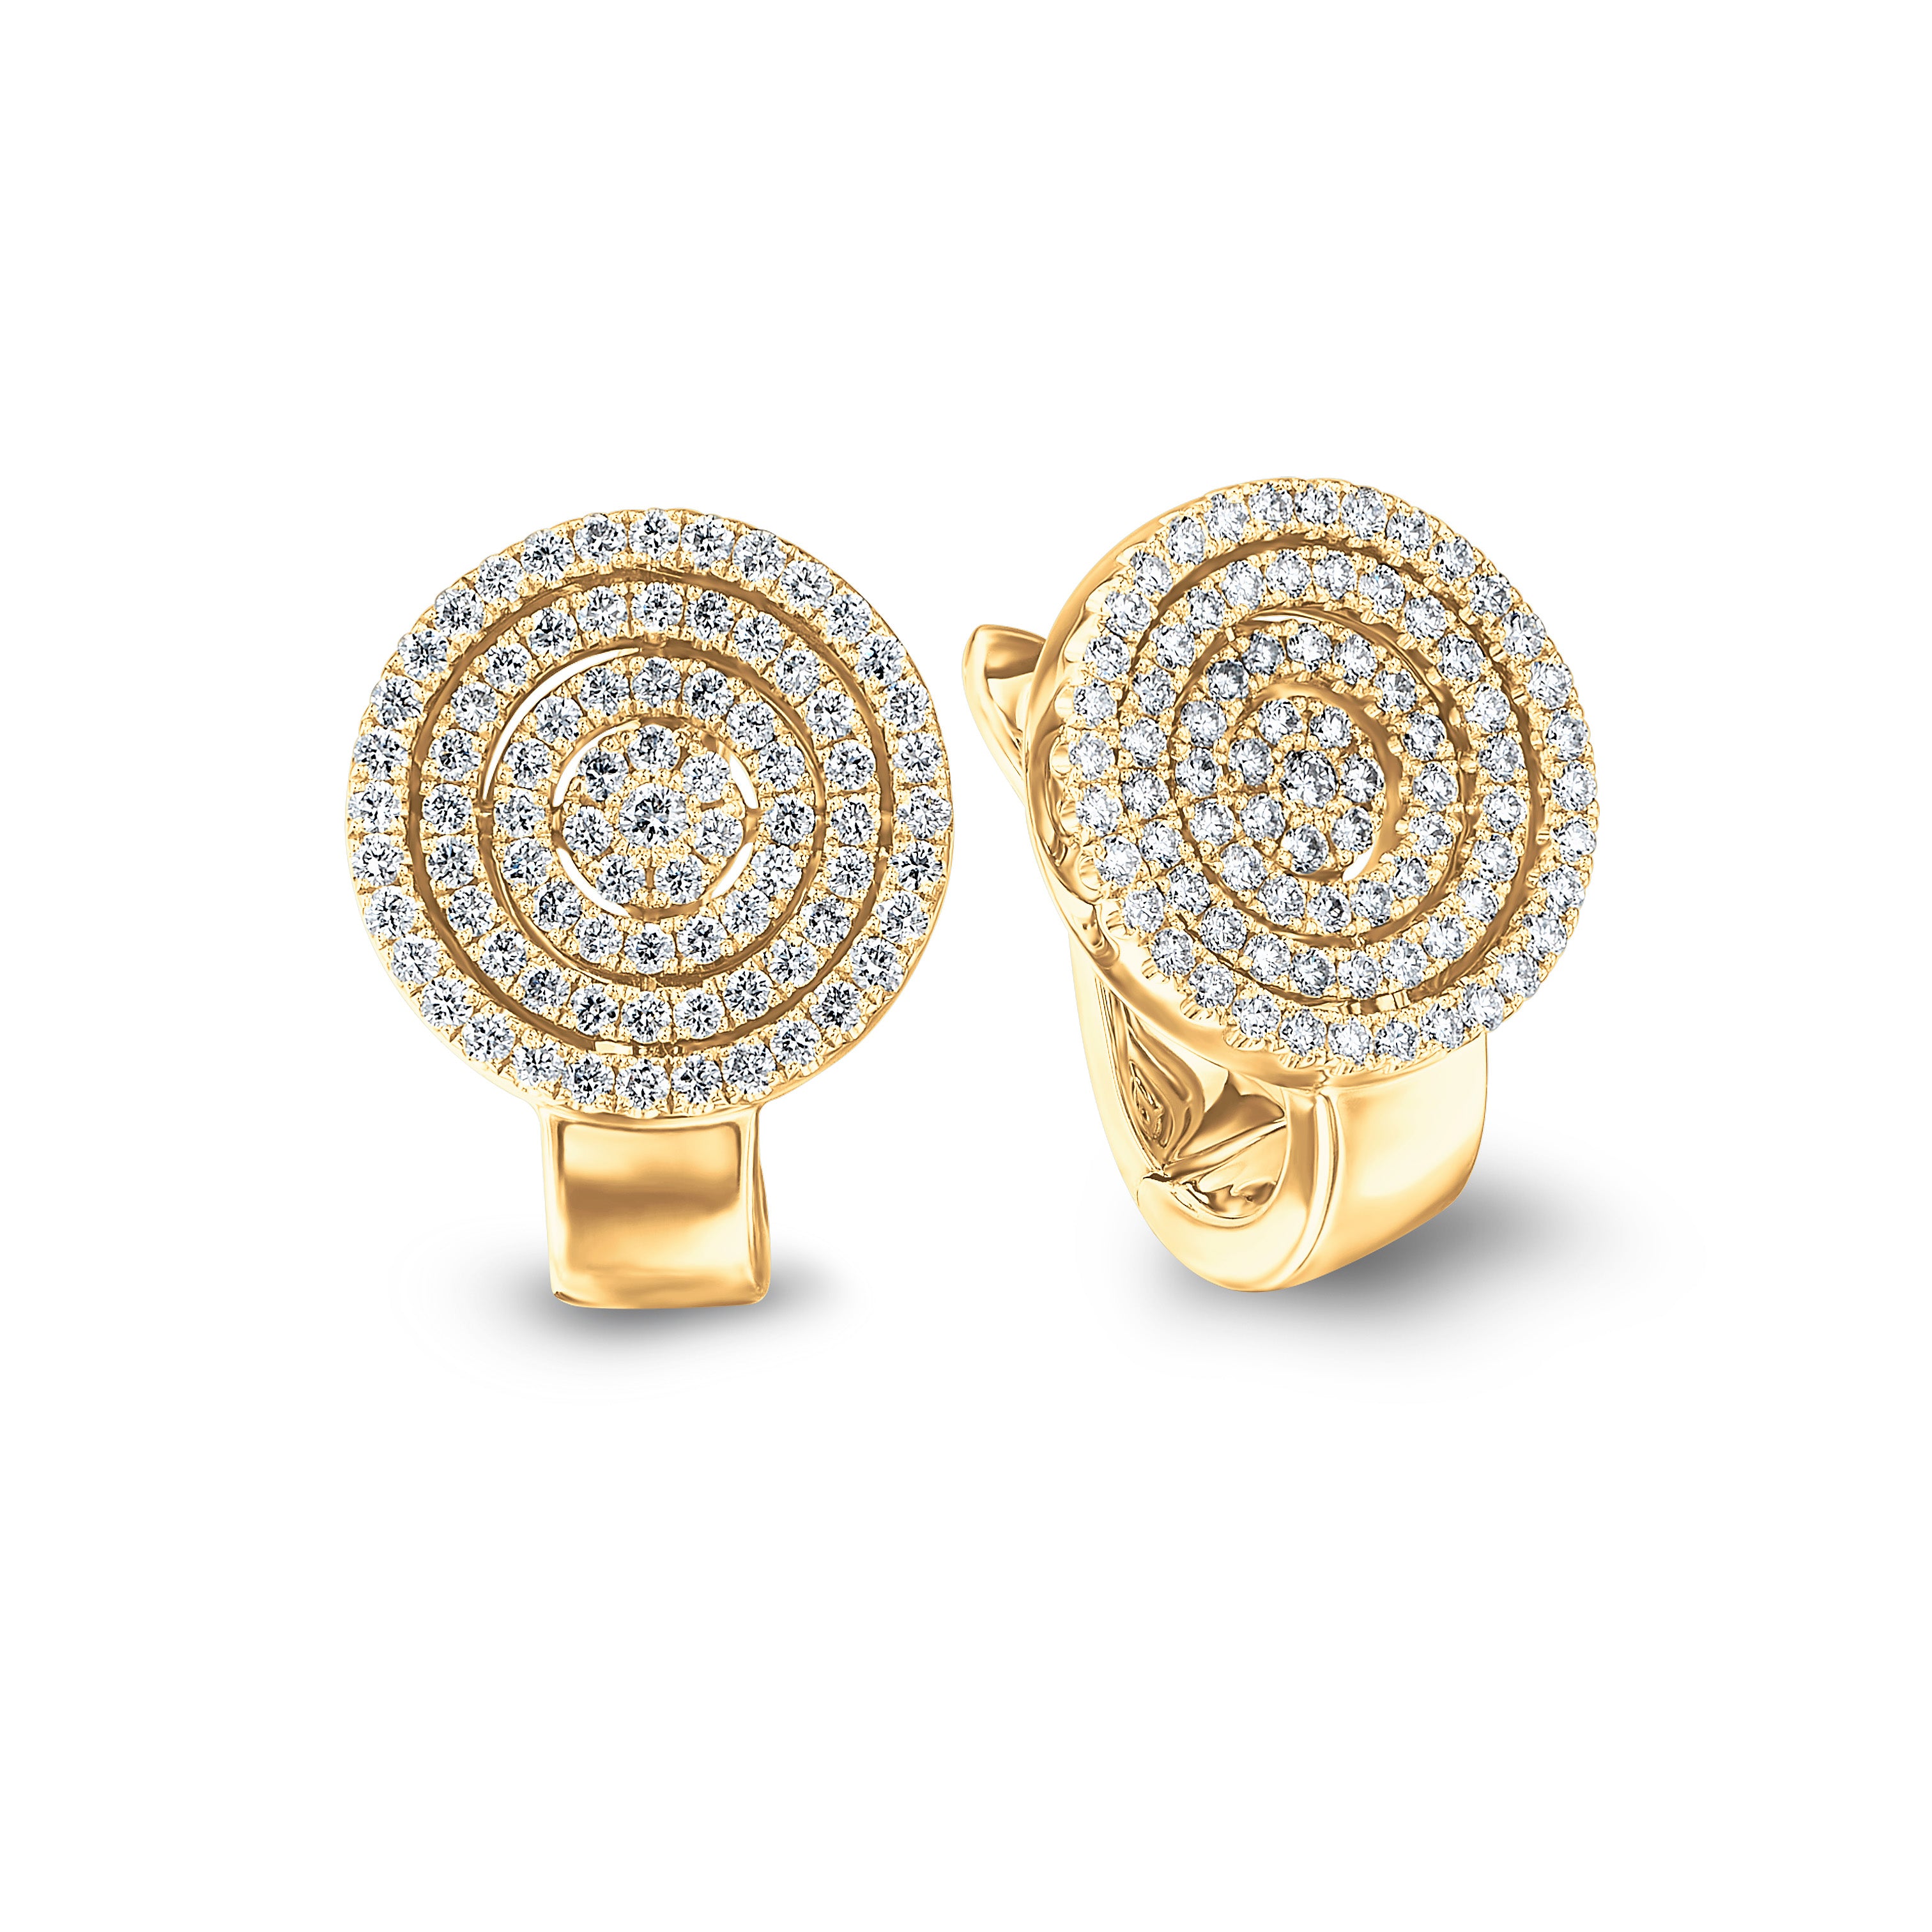 Shimansky - Starlight Diamond Round Earrings 0.80ct crafted in 18K Yellow Gold